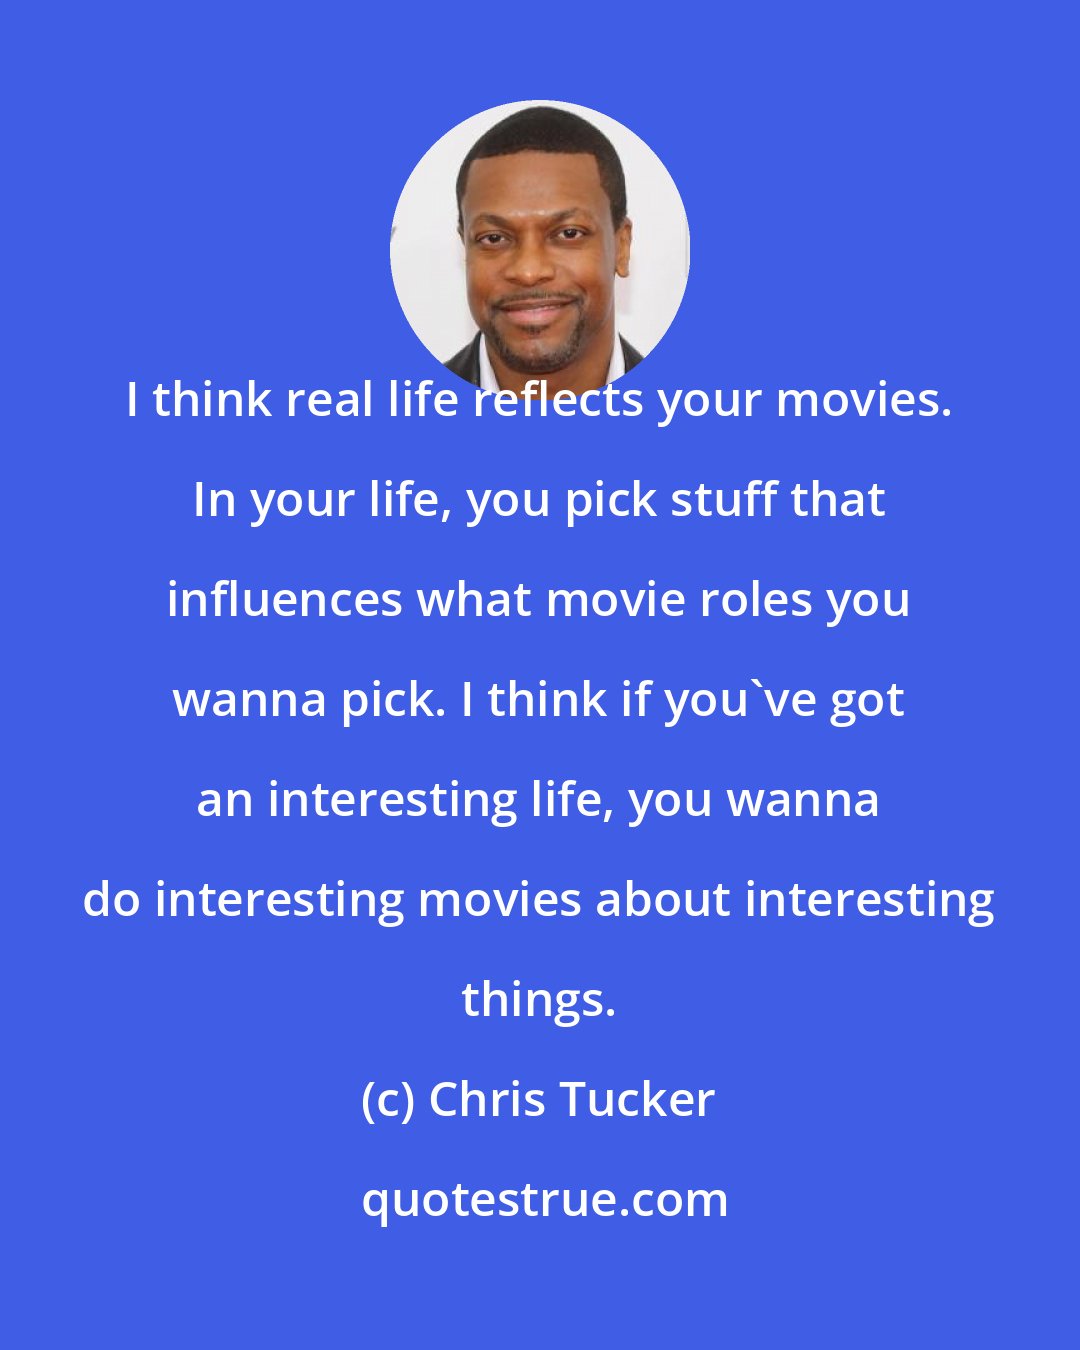 Chris Tucker: I think real life reflects your movies. In your life, you pick stuff that influences what movie roles you wanna pick. I think if you've got an interesting life, you wanna do interesting movies about interesting things.